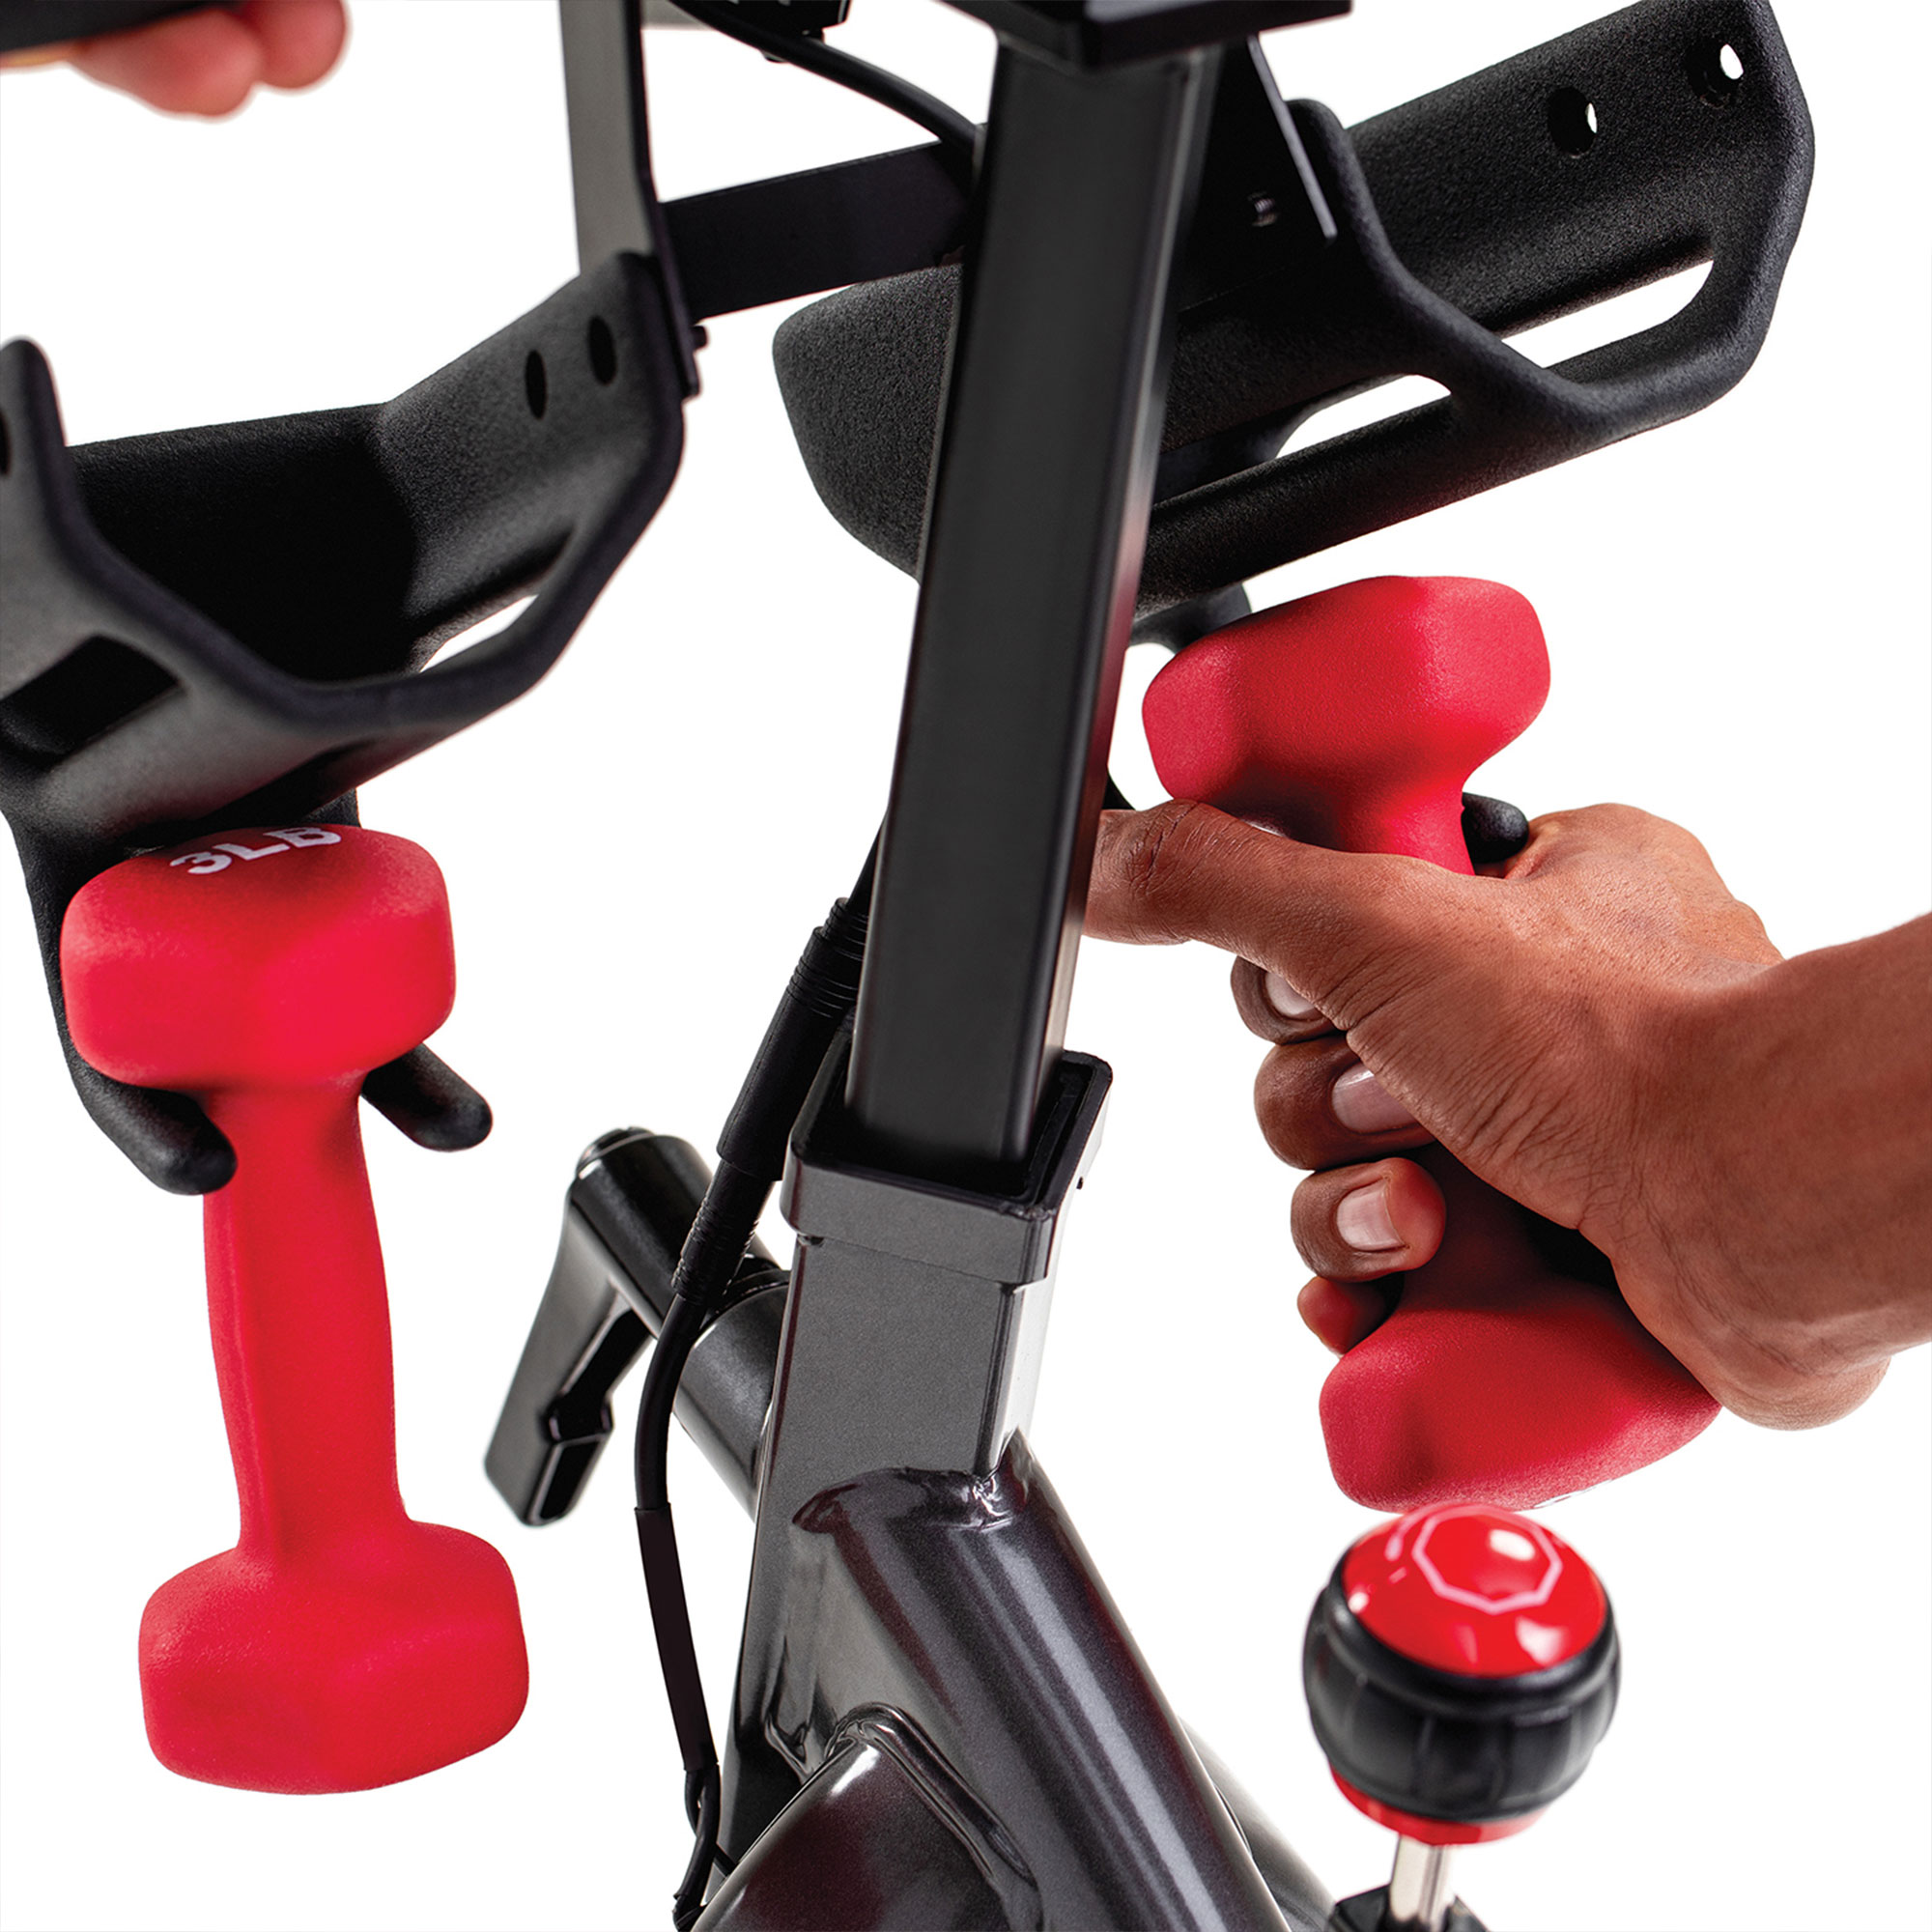 Schwinn Fitness IC4 Indoor Stationary Exercise Cycling Training Bike, Free 2-Month JRNY Membership - image 8 of 14